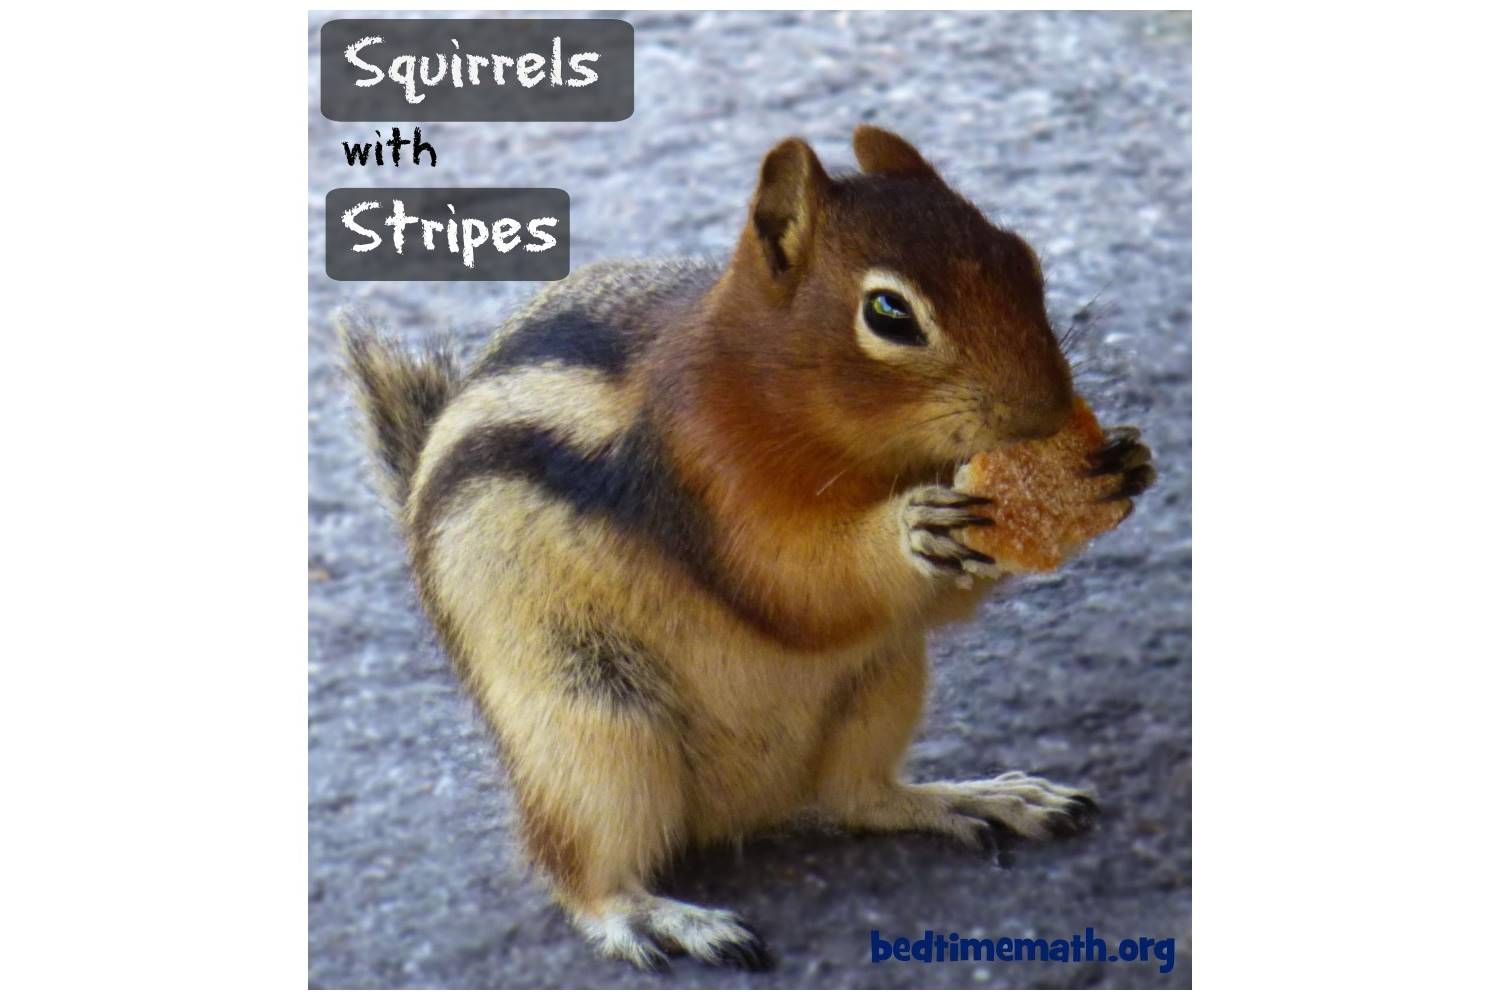 Squirrels with Stripes